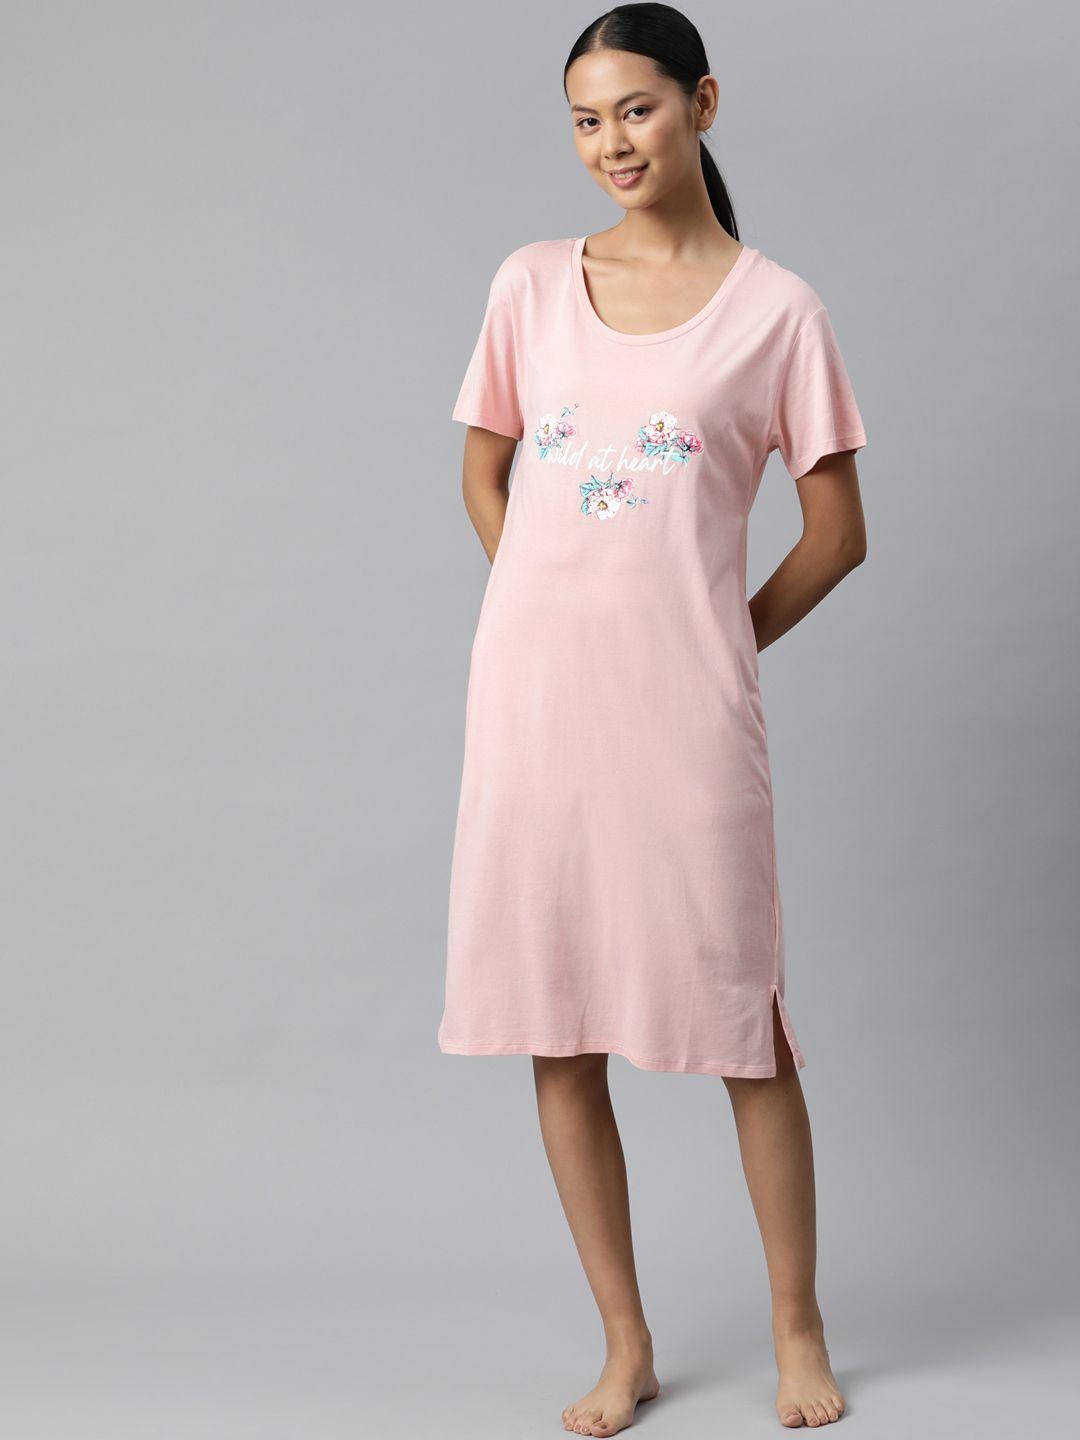 marks & spencer pink & white floral printed nightdress